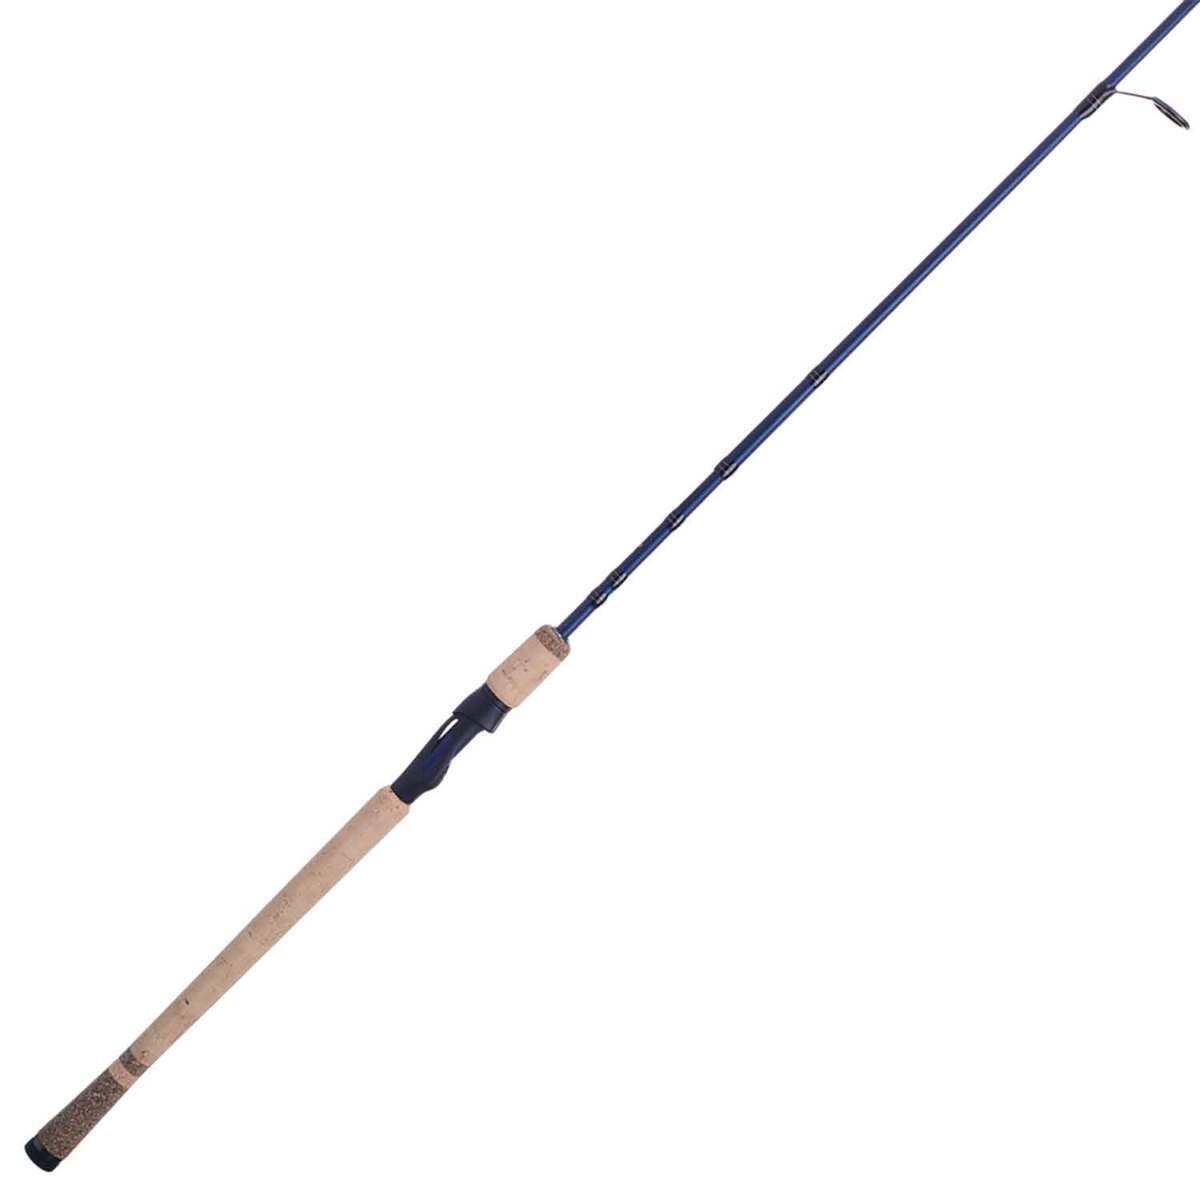 FENWICK MODEL PS130 12 FOOT, 15 TO 30 POUND RATED 2-PIECE SPINNING SURF  ROD, PRE-OWNED - Berinson Tackle Company